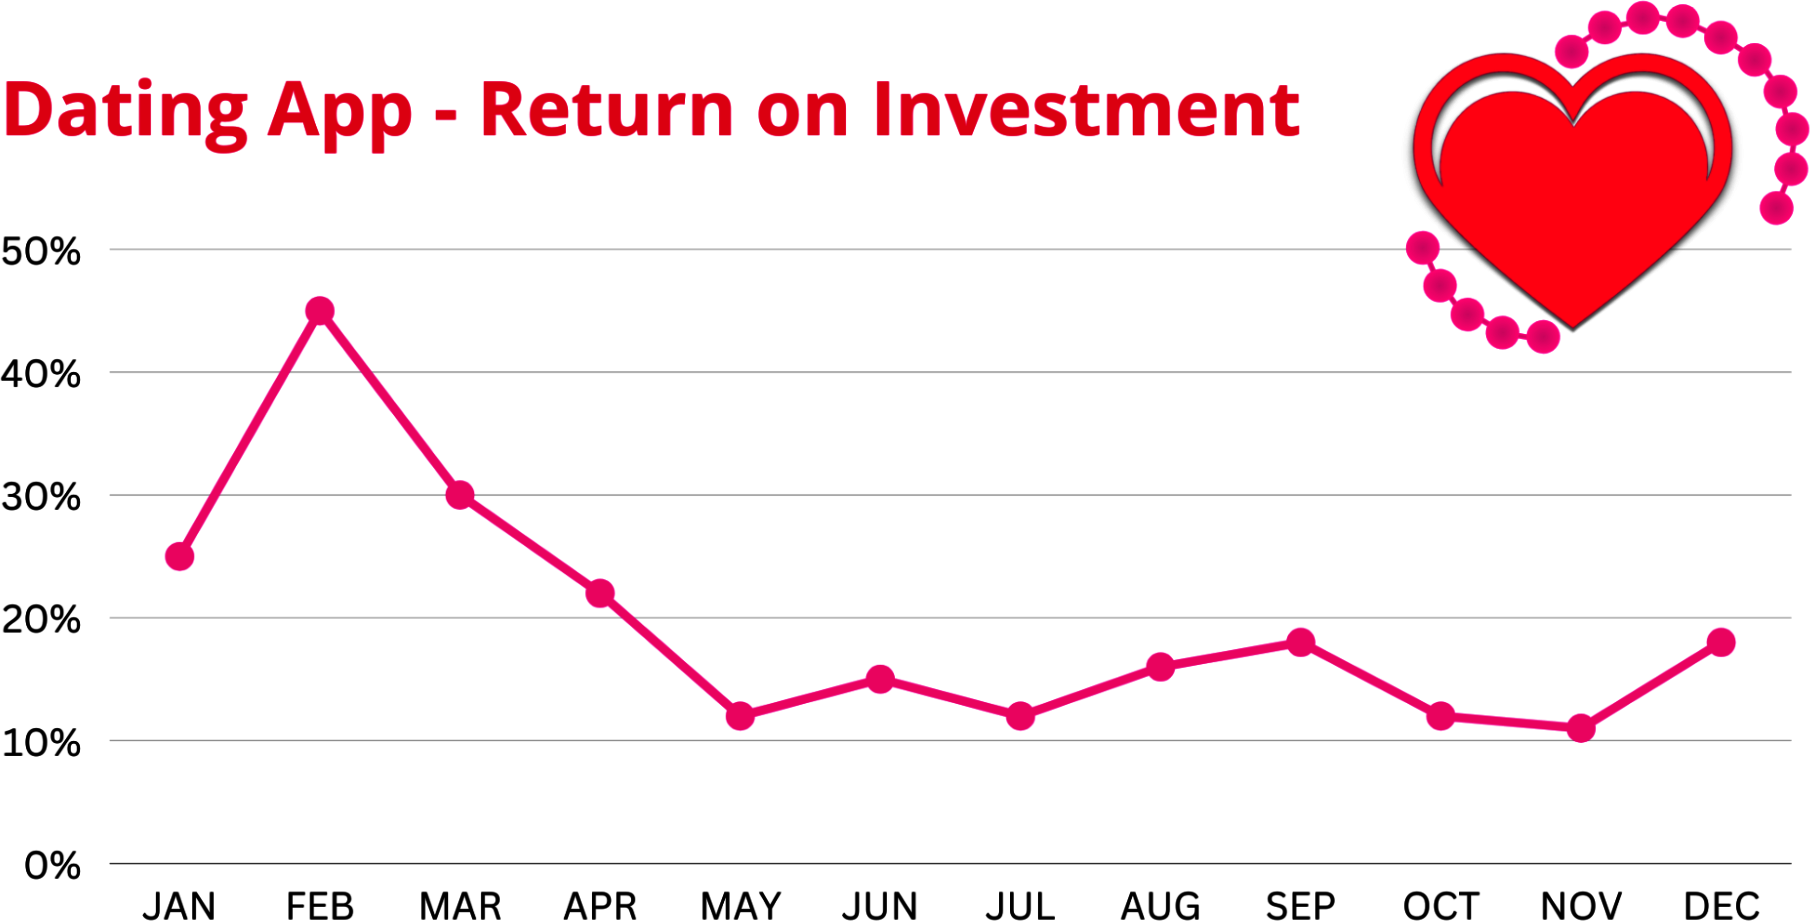 Line graph showing return on investment for a dating app